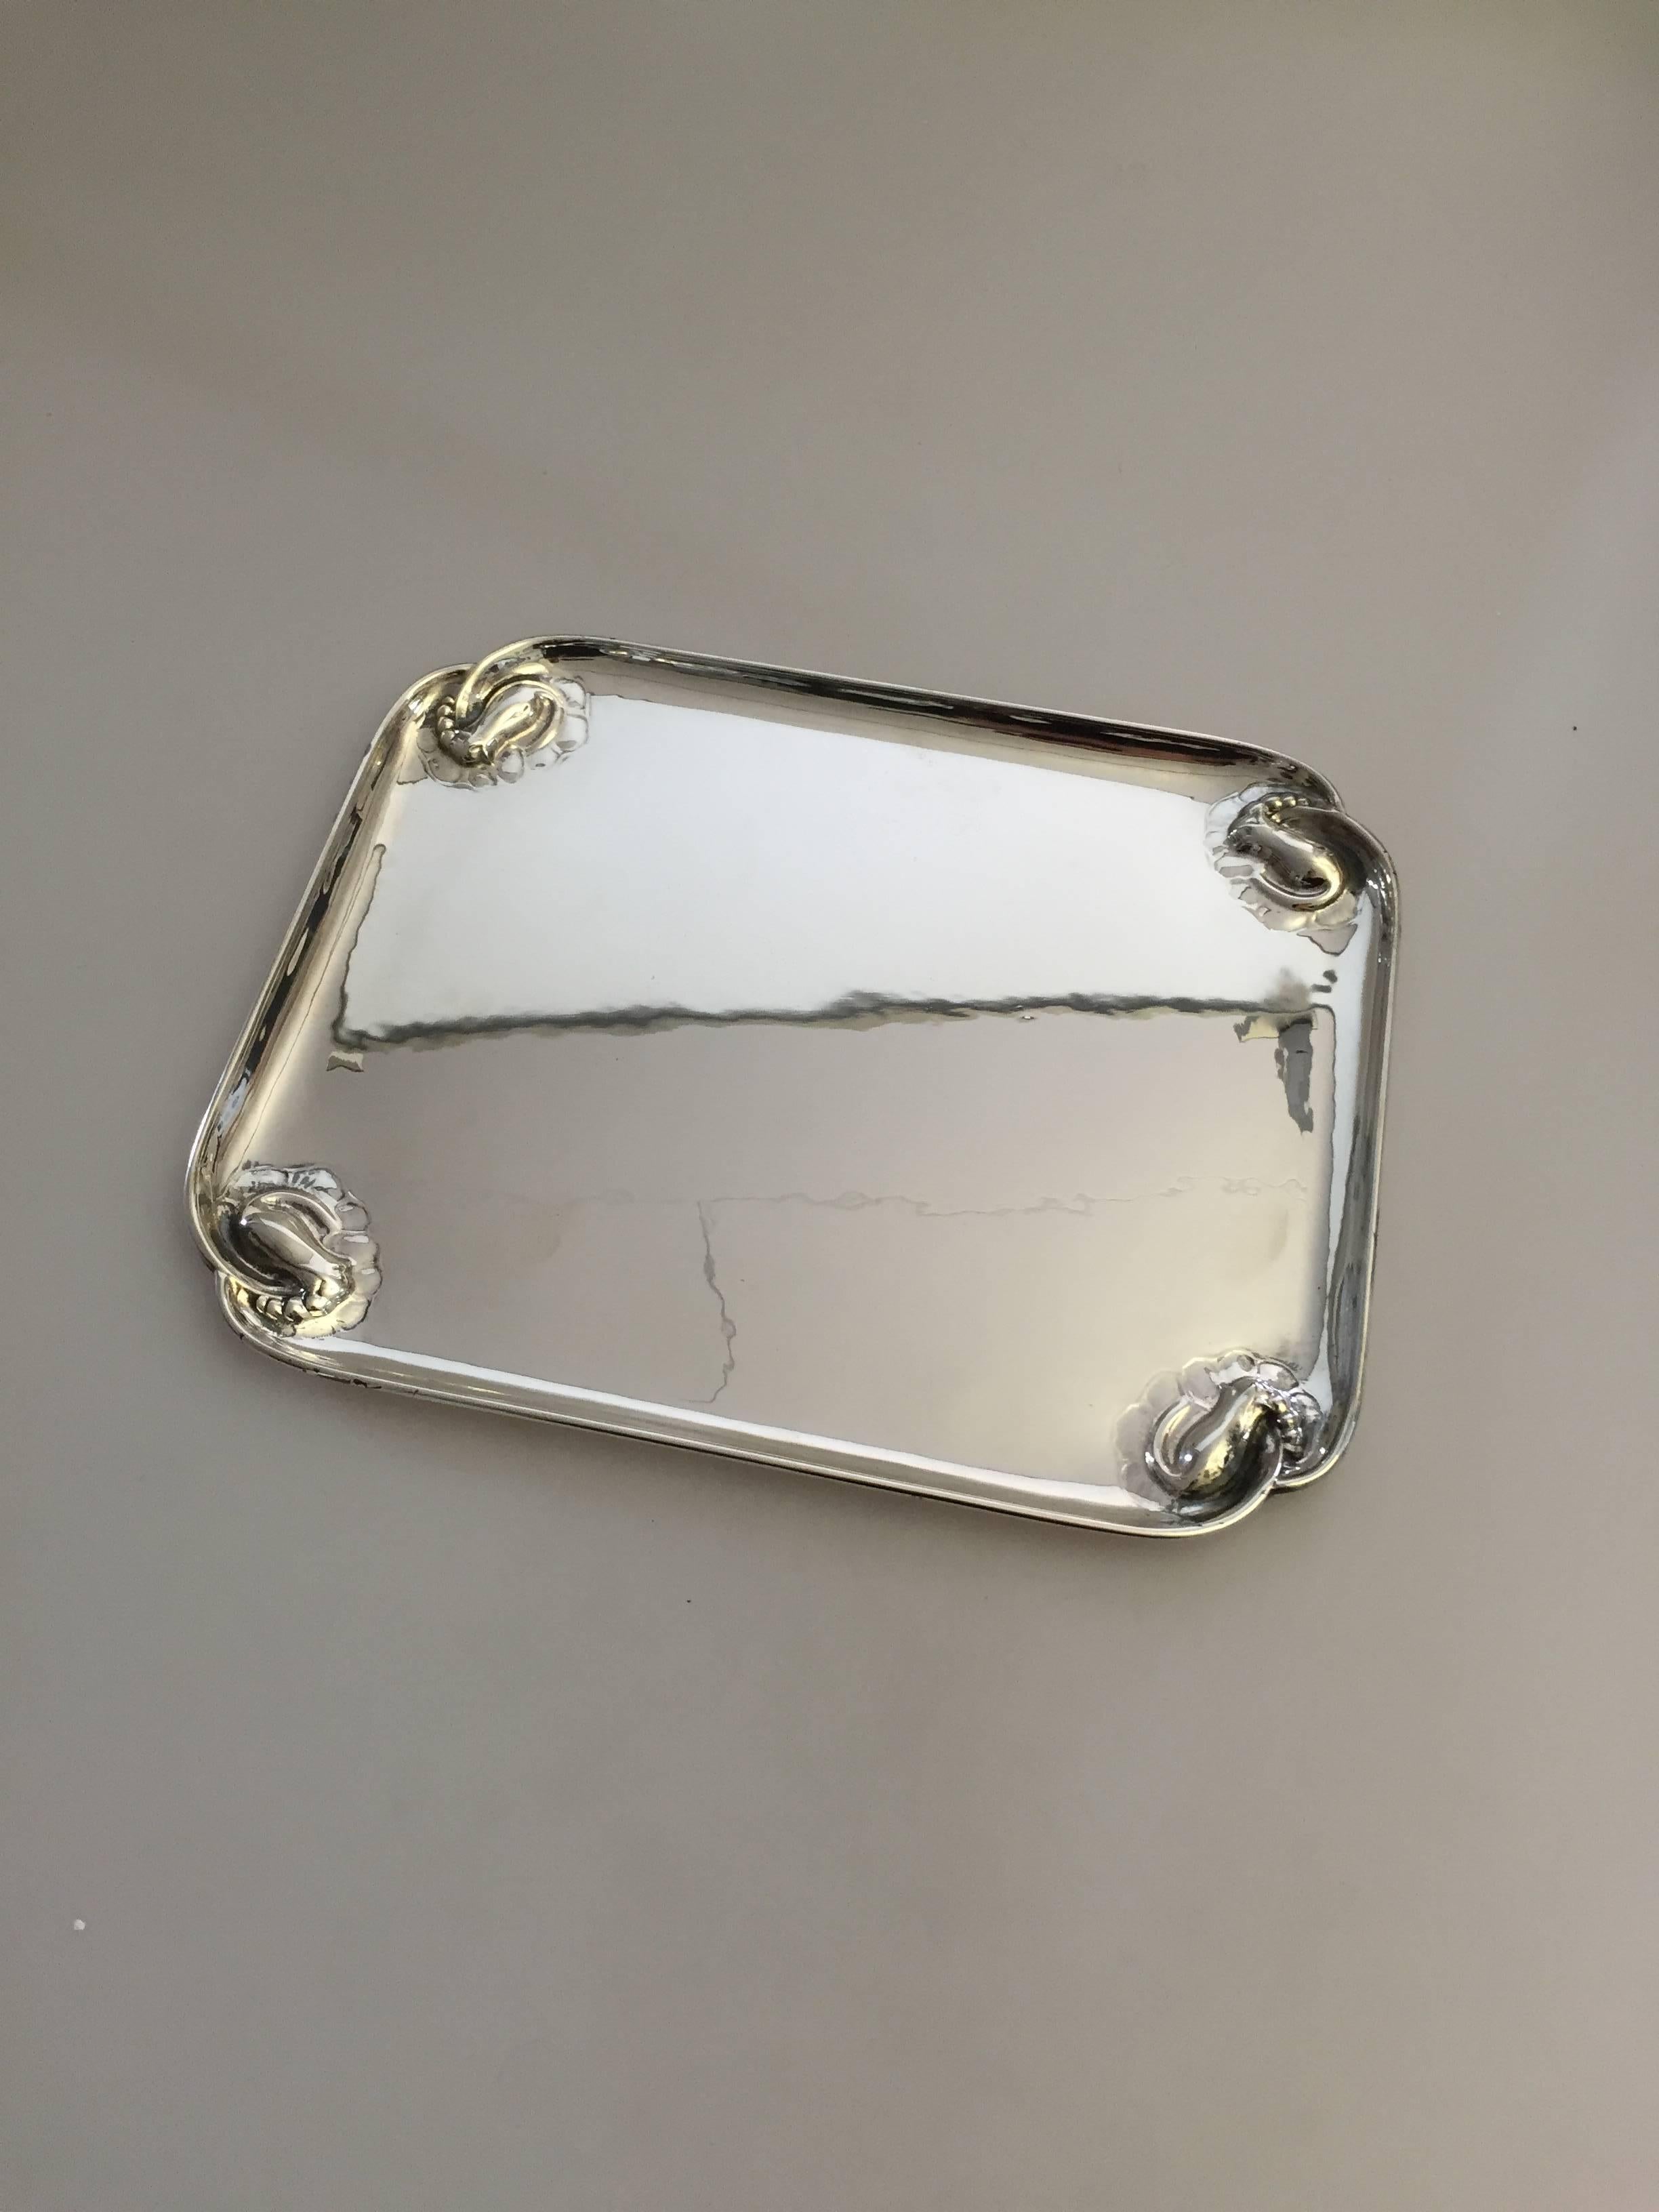 Georg Jensen sterling silver blossom tray. The tray is from 1925-1932. It measures 28 cm x 23 cm. Is in a Fine condition. 

Georg Jensen (1866-1935) opened his small silver atelier in Copenhagen, Denmark in 1904. By 1935 the year of his death, he